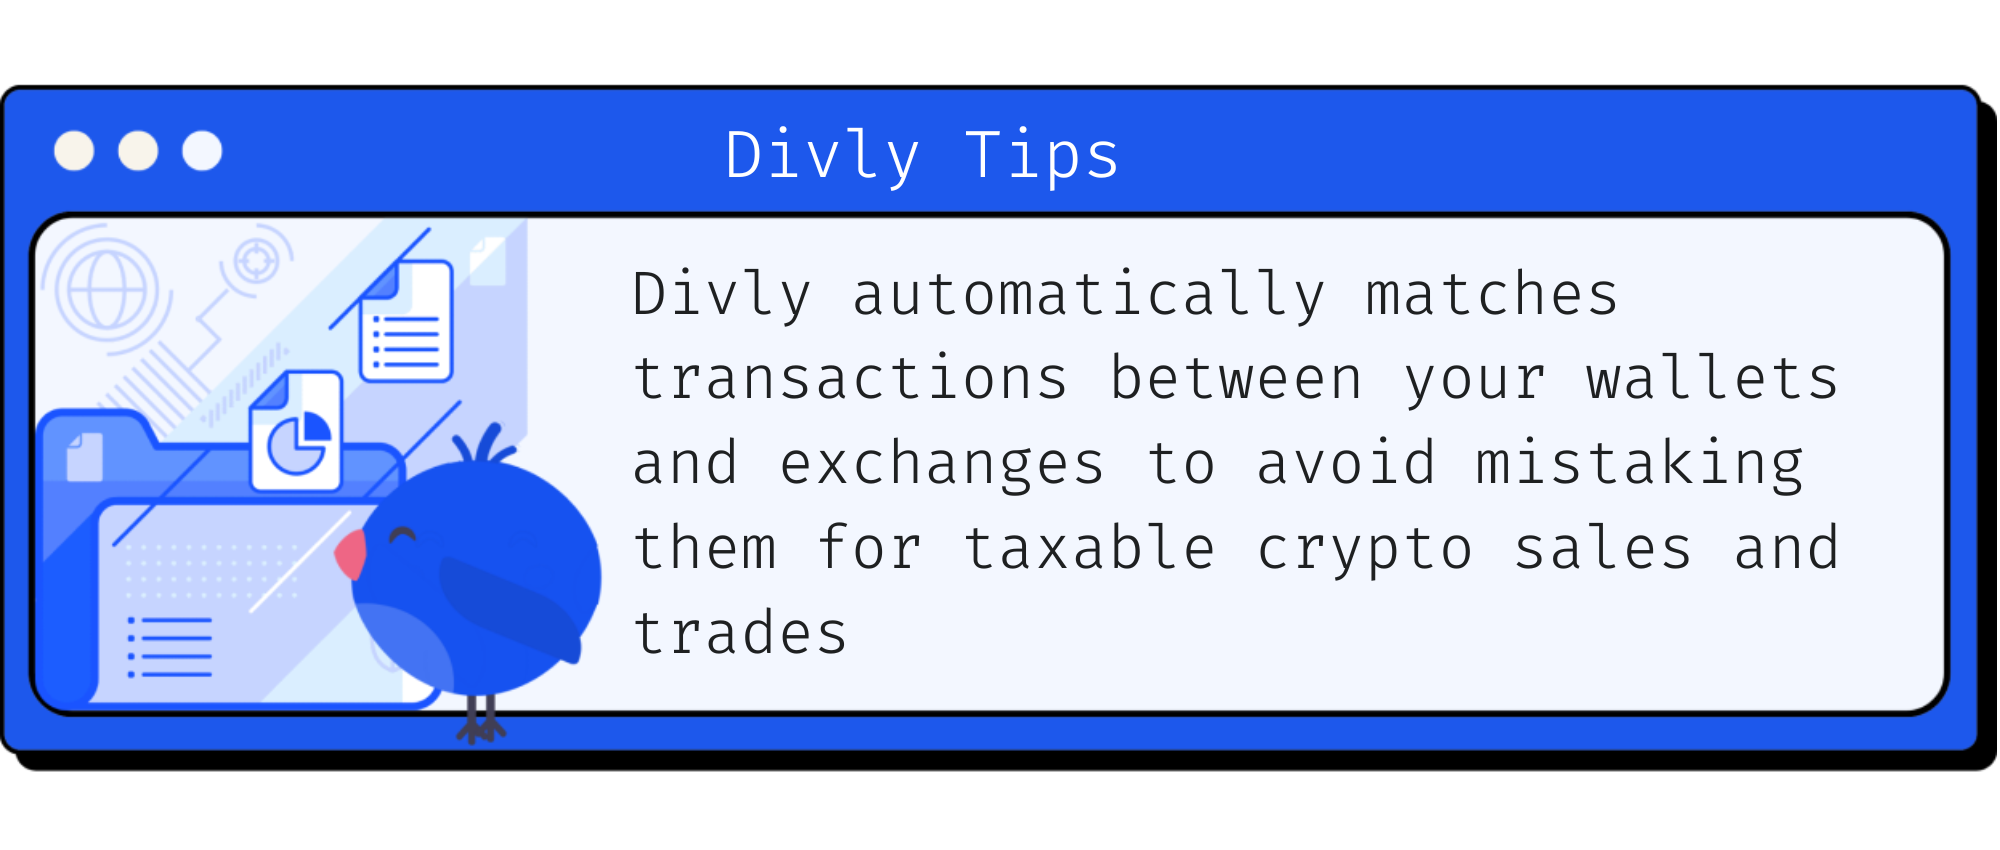 Divly automatically matches transactions between your wallets and exchanges to avoid mistaking them for taxable crypto sales and trades